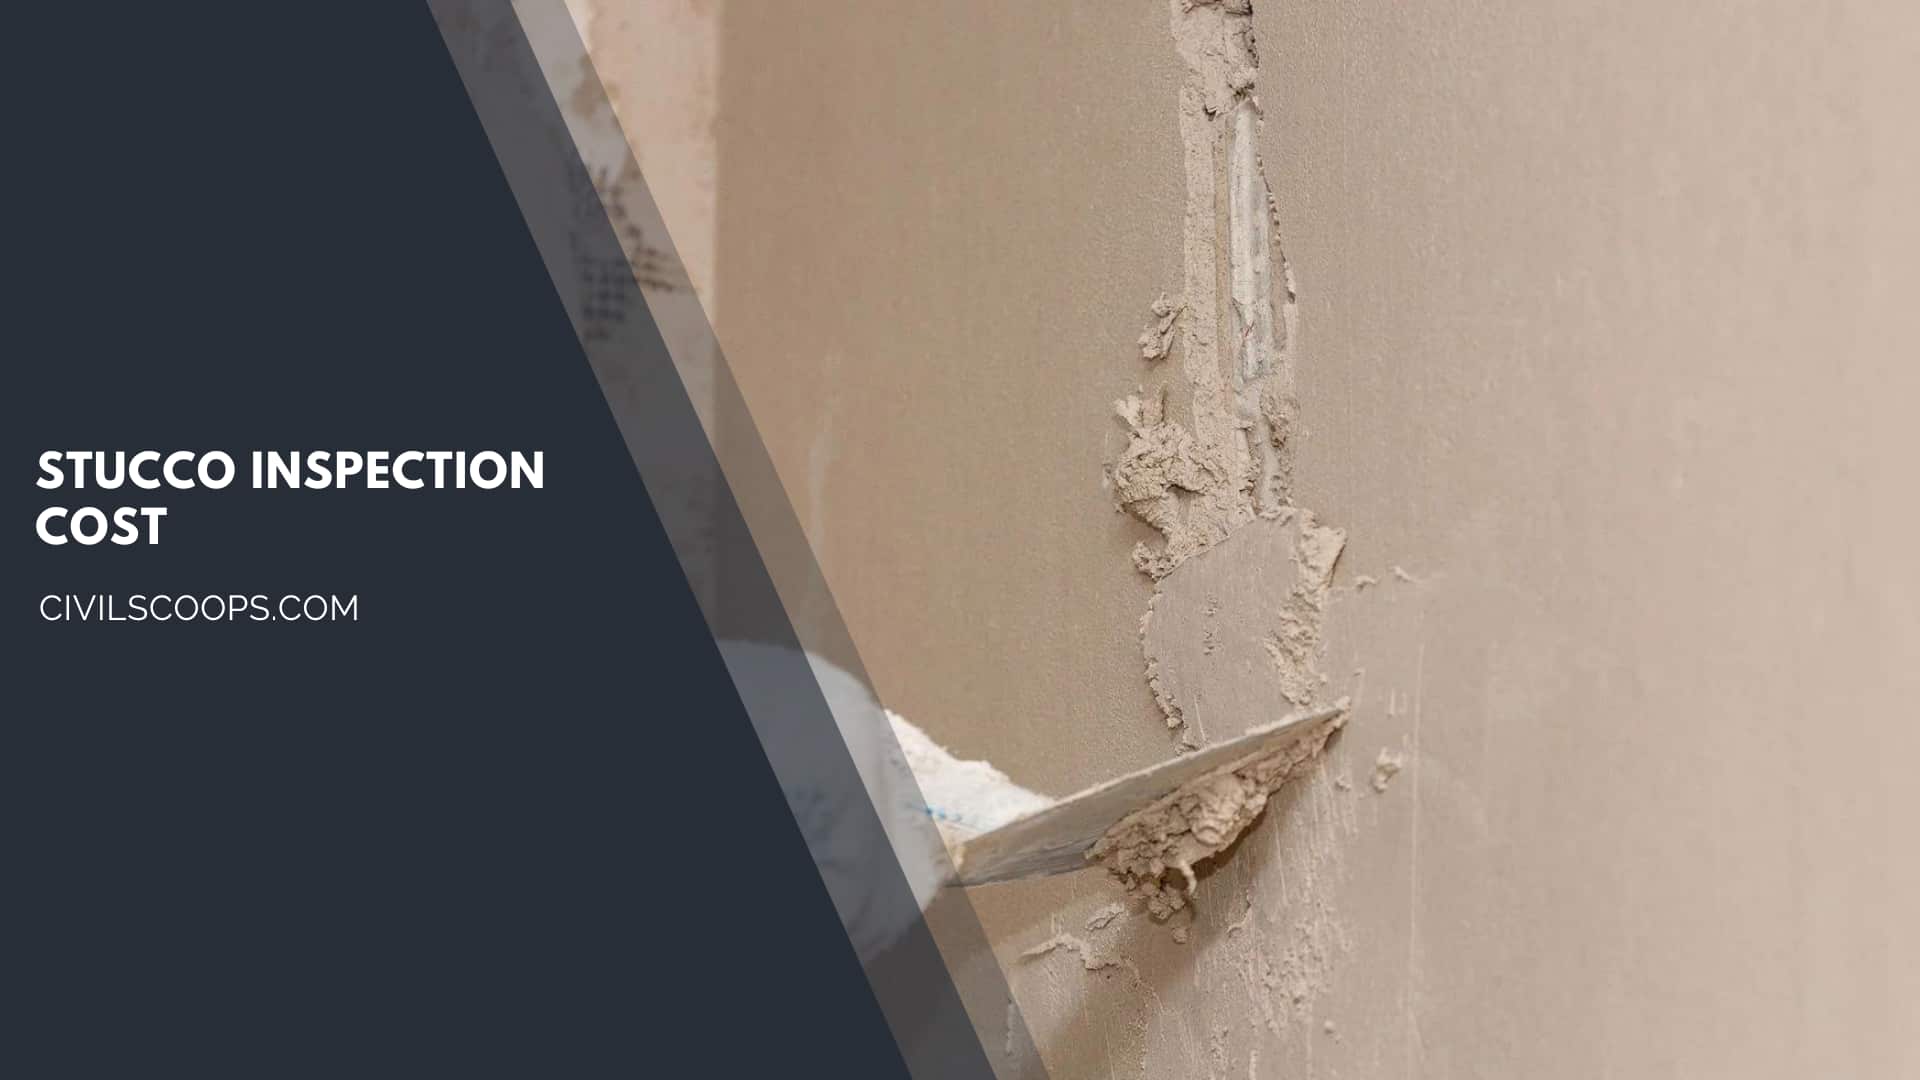 Stucco Inspection Cost